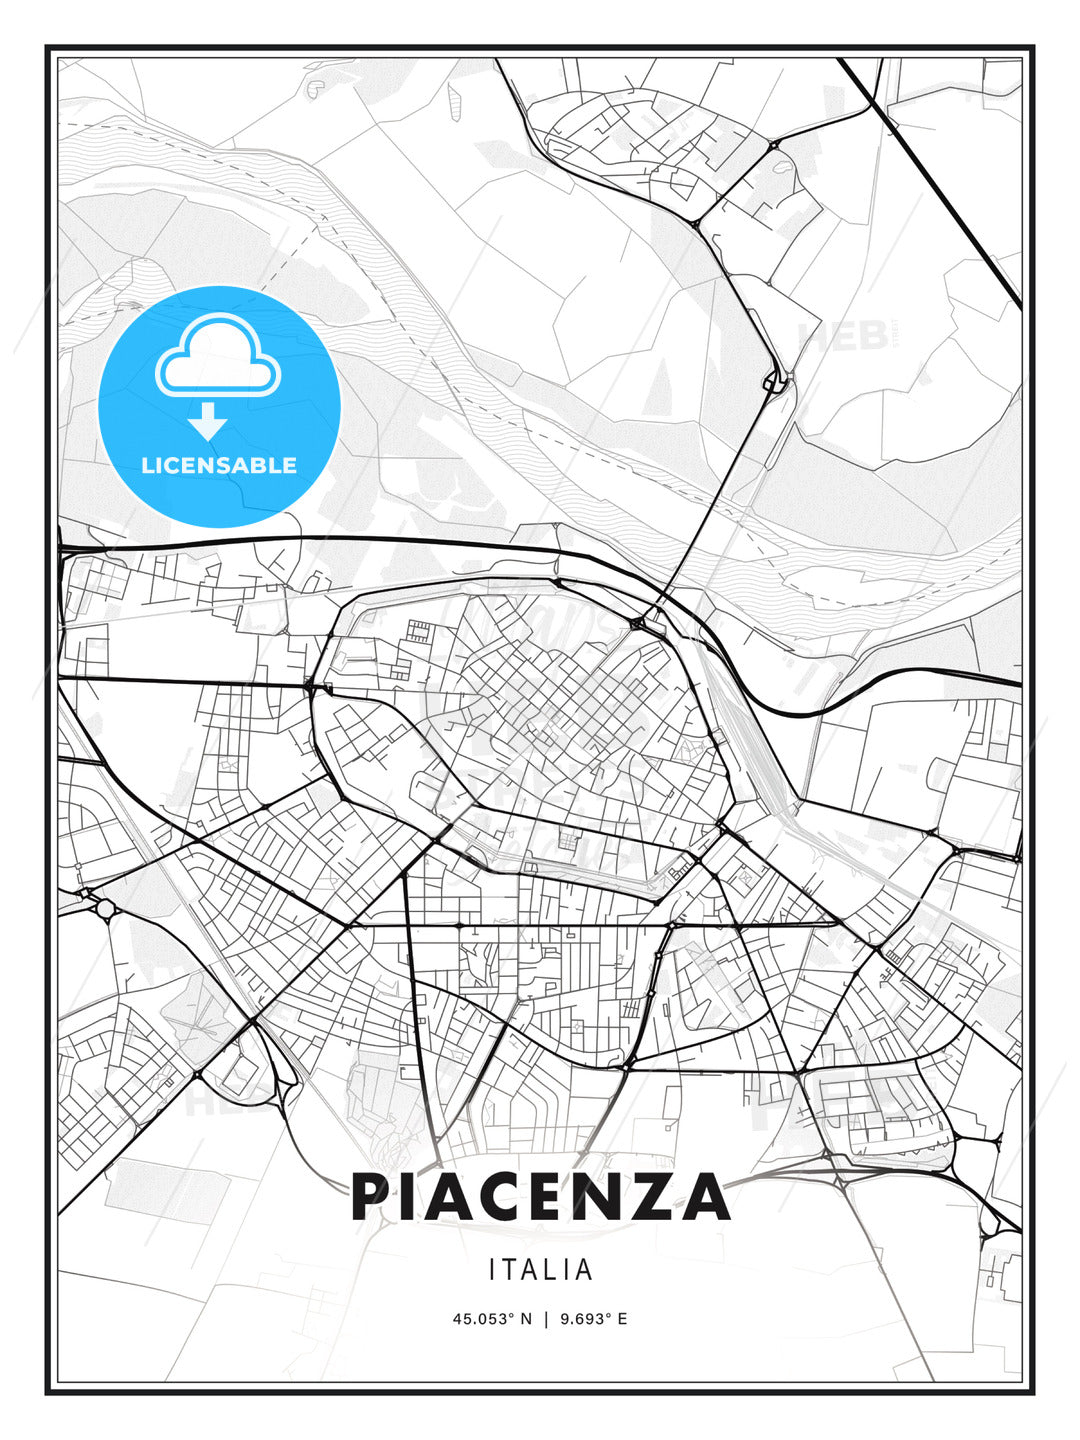 Piacenza, Italy, Modern Print Template in Various Formats - HEBSTREITS Sketches